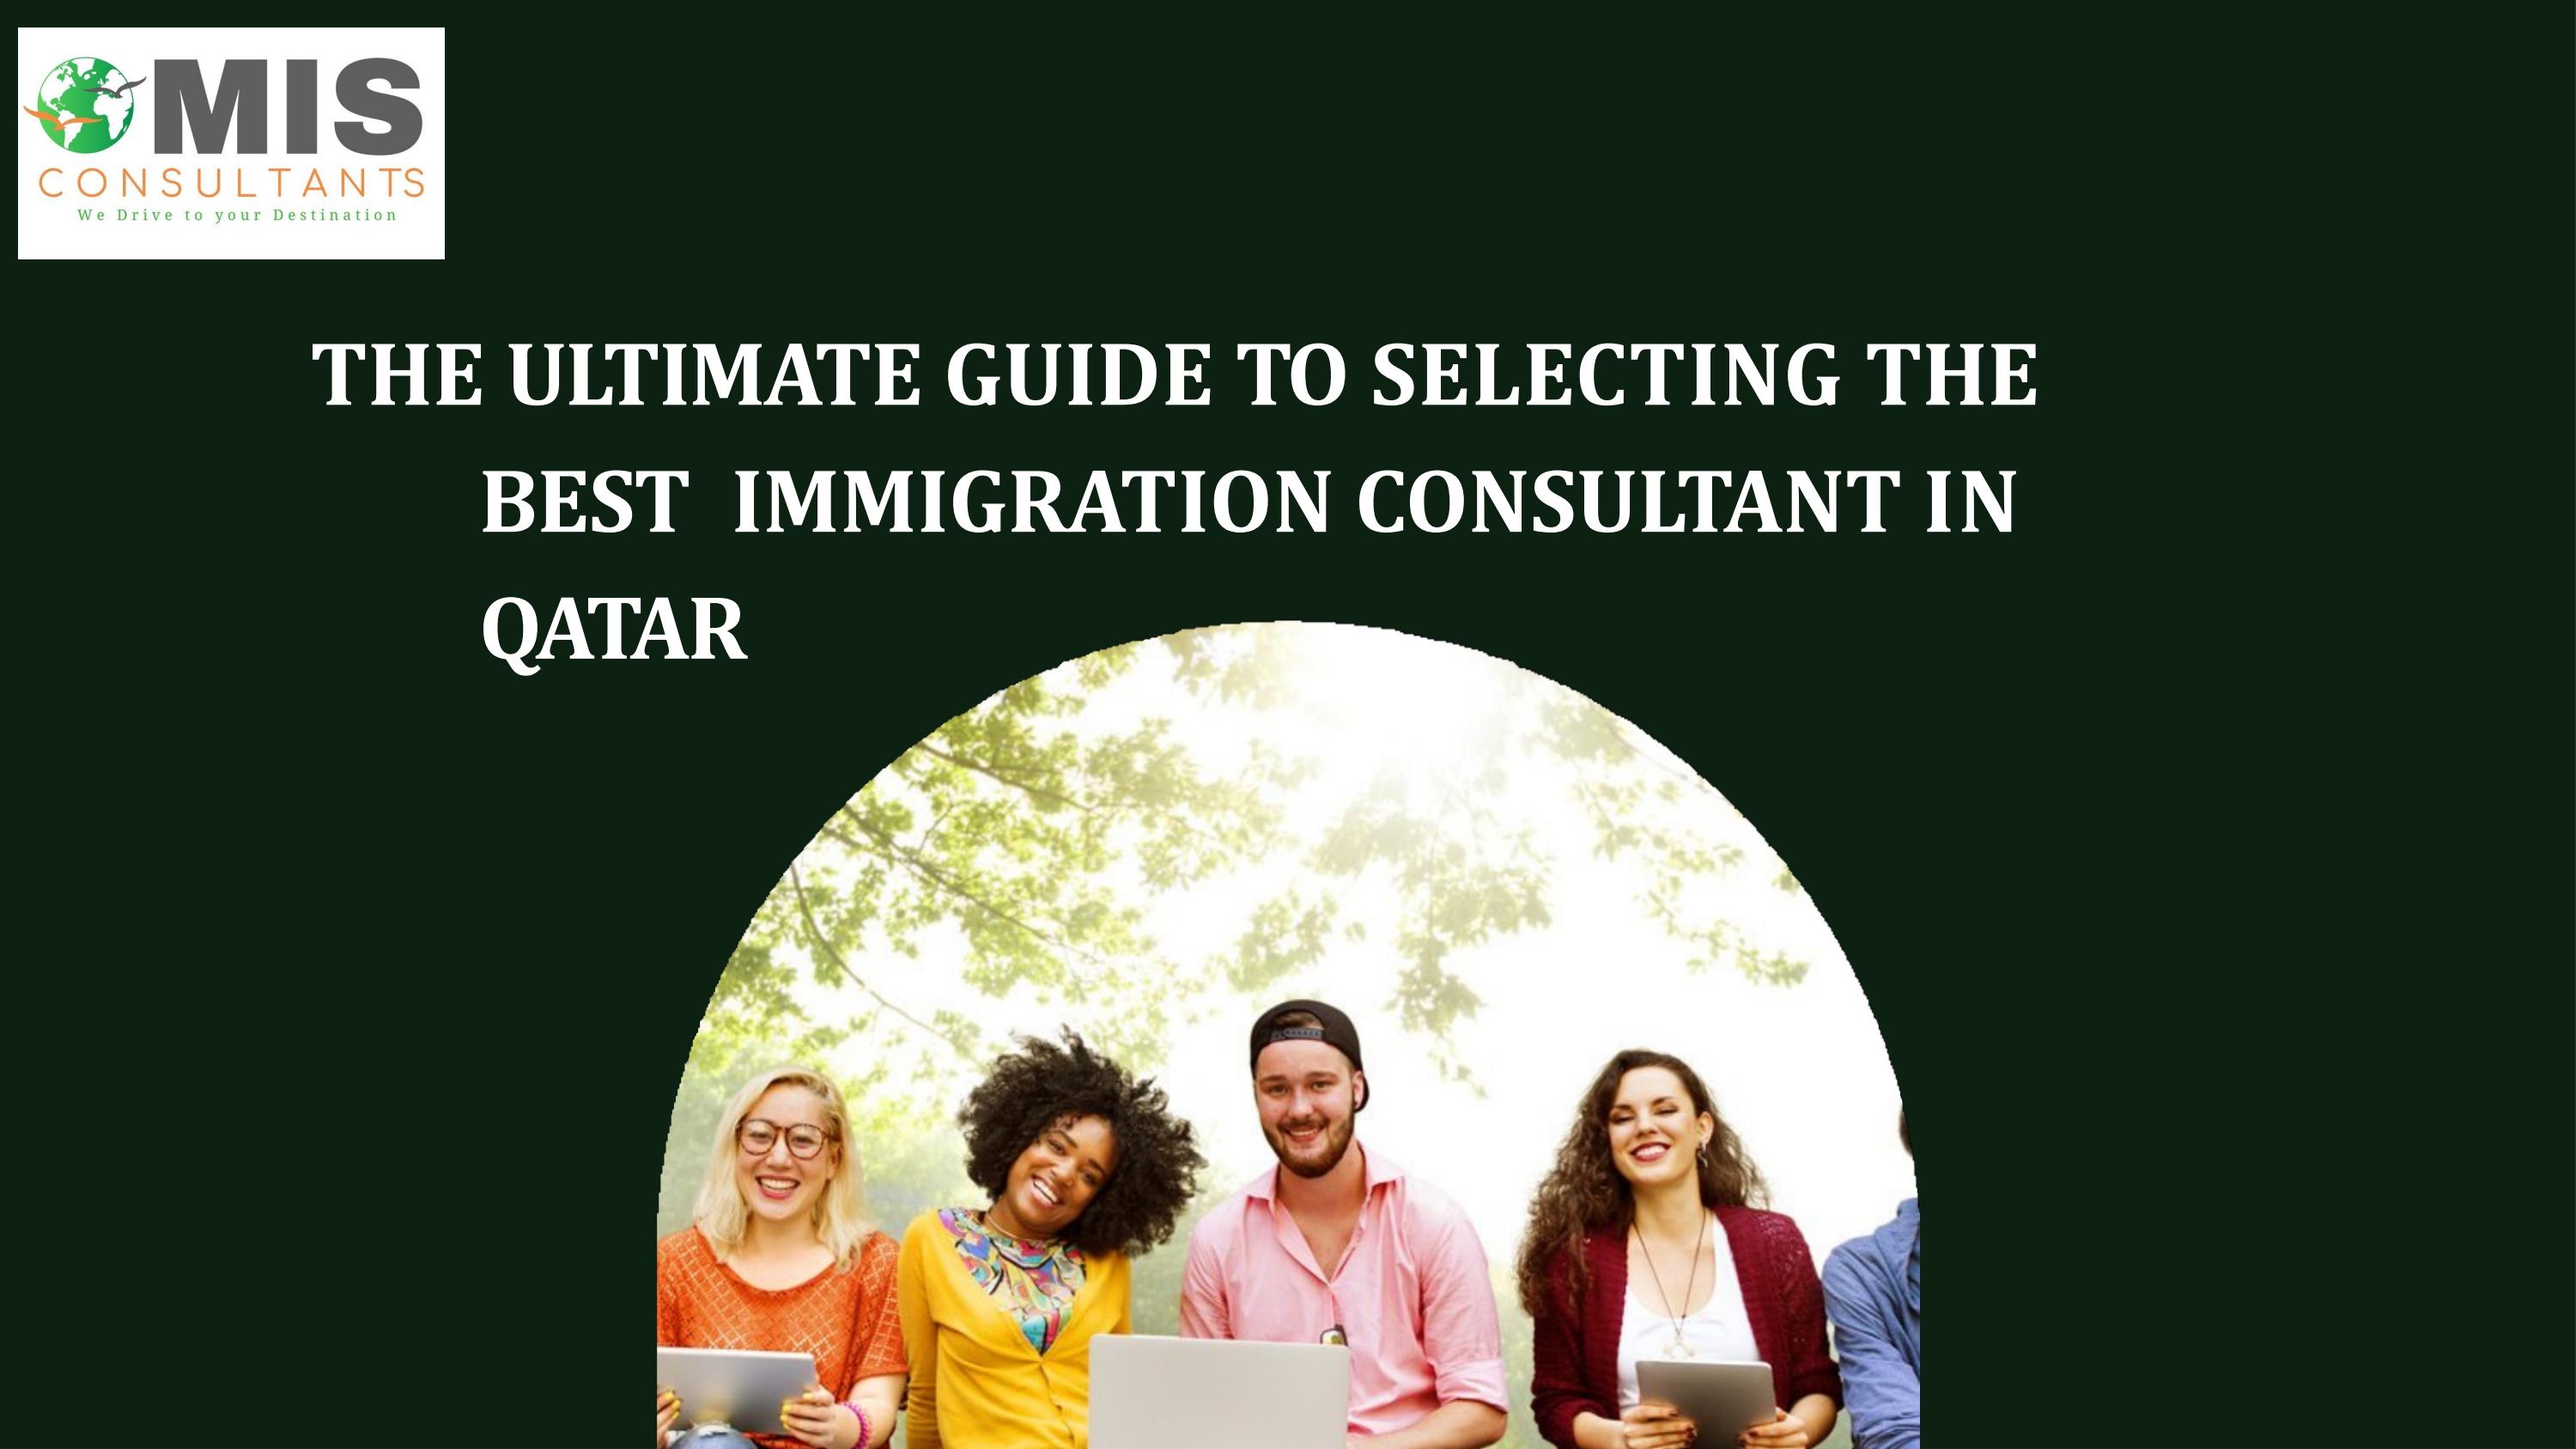 The Ultimate Guide to Selecting the Best Immigration Consultant in Qatar